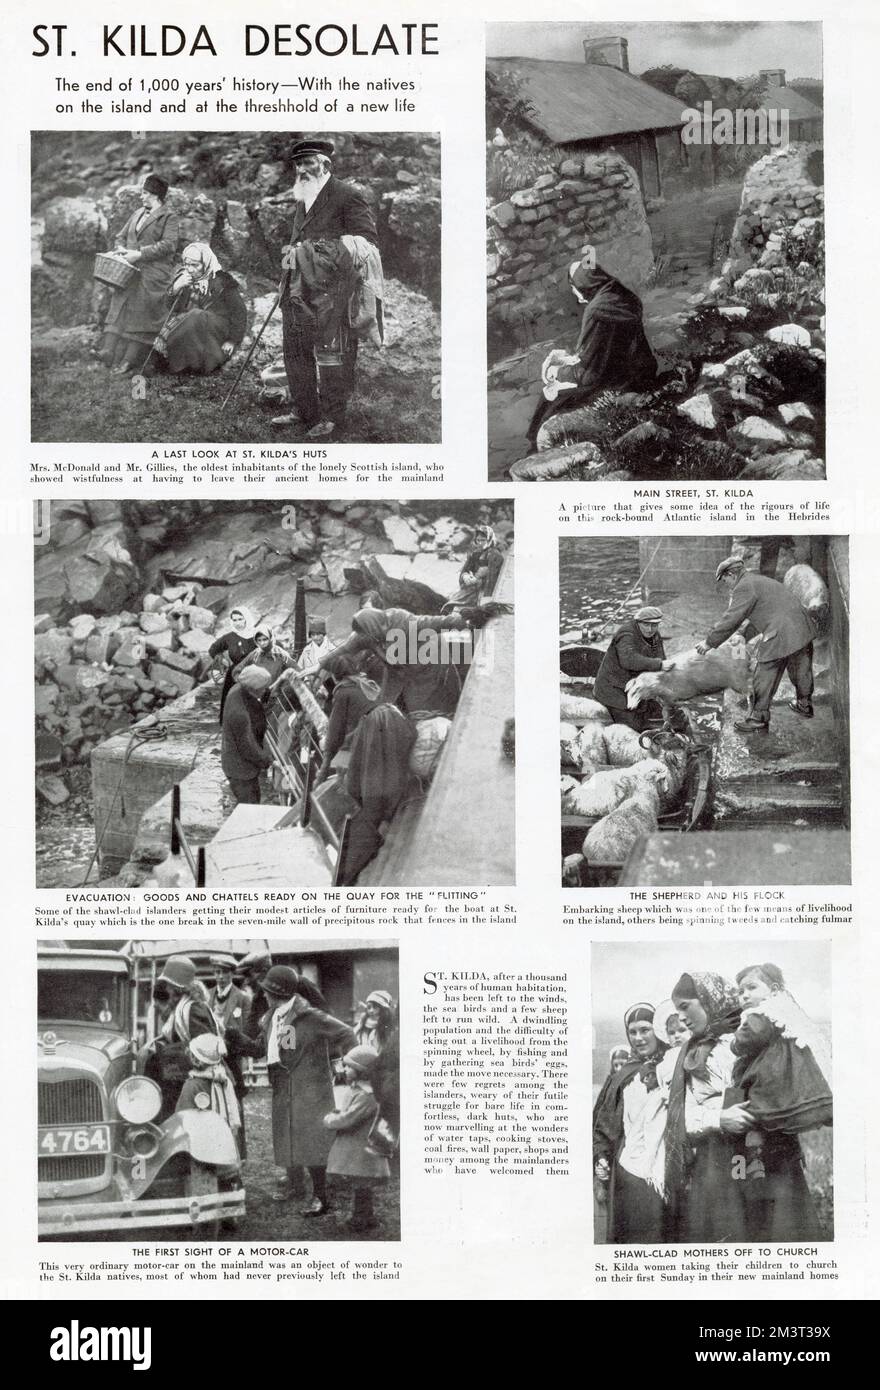 Page from The Graphic reporting on the evacuation of St. Kilda after 1000 years of human habitation. Stock Photo